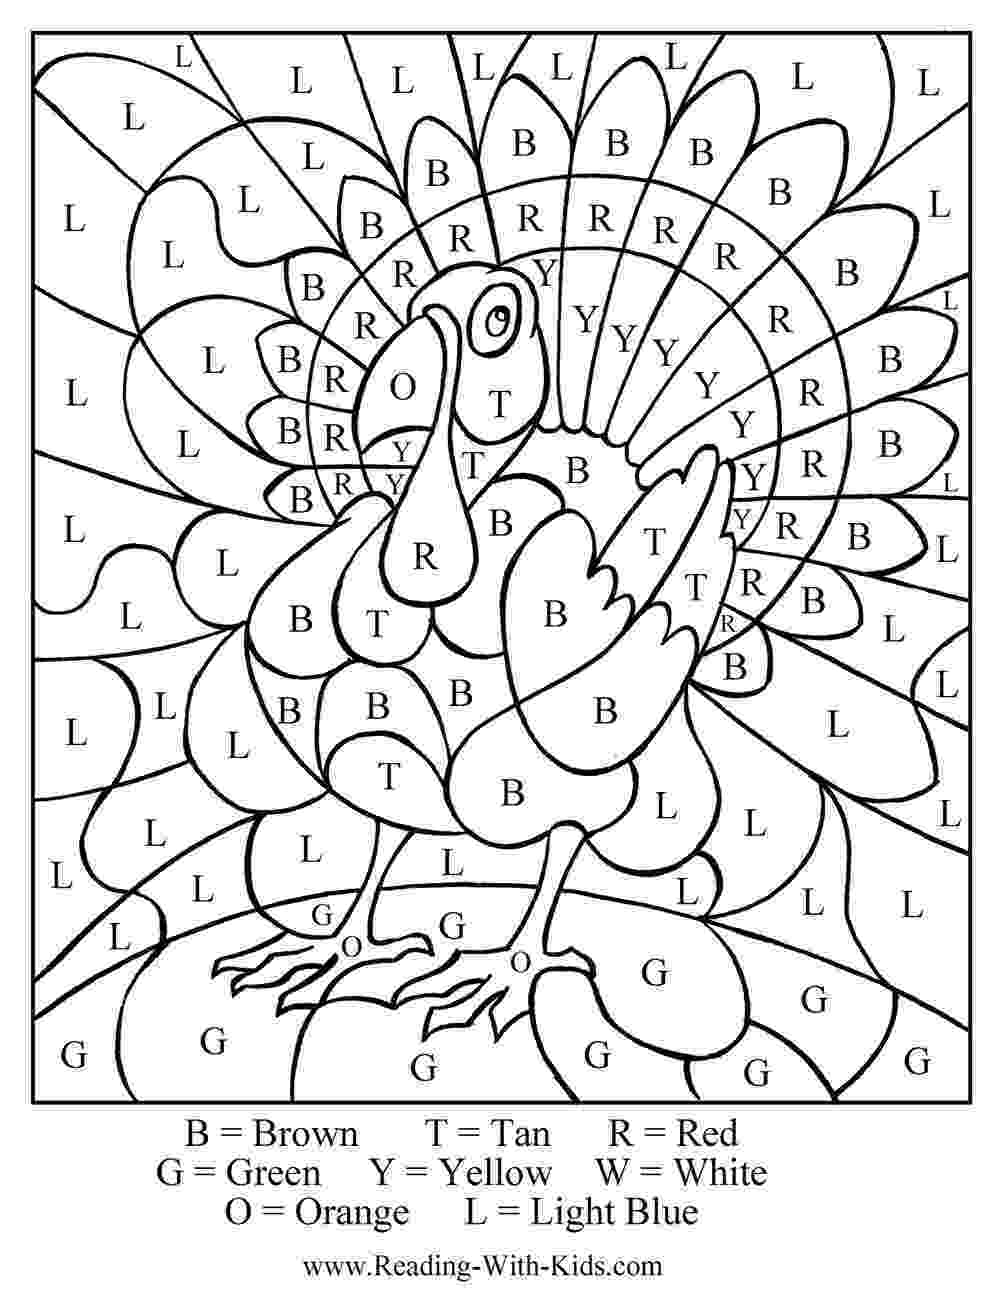 free printable color by number 55 free thanksgiving games crafts coloring pages decor free color number by printable 